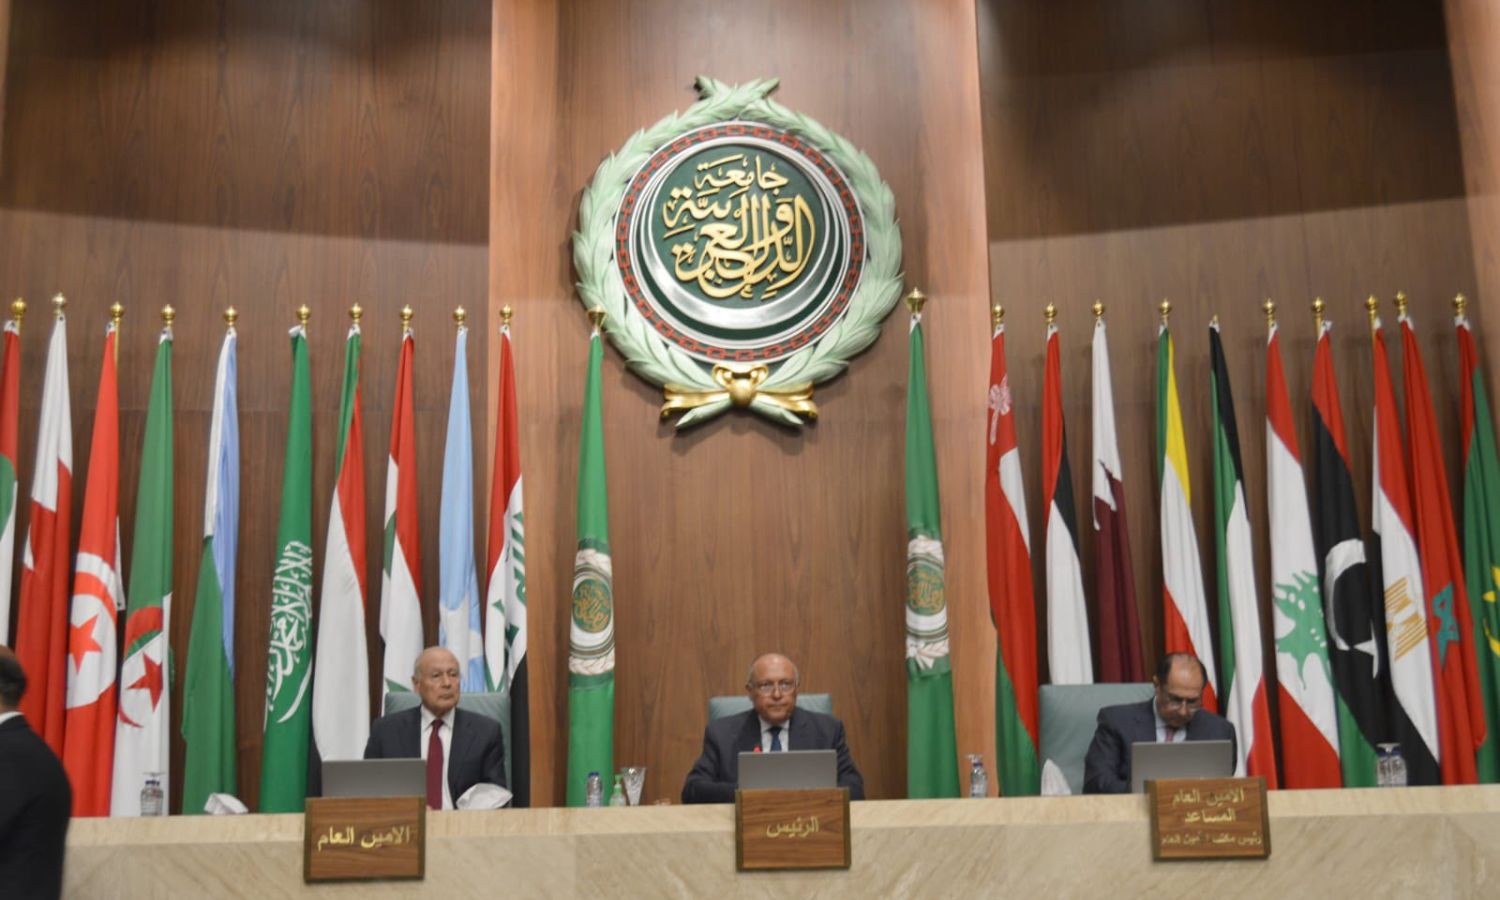 Arab League Comments on Ministerial Committee Reports on Syria